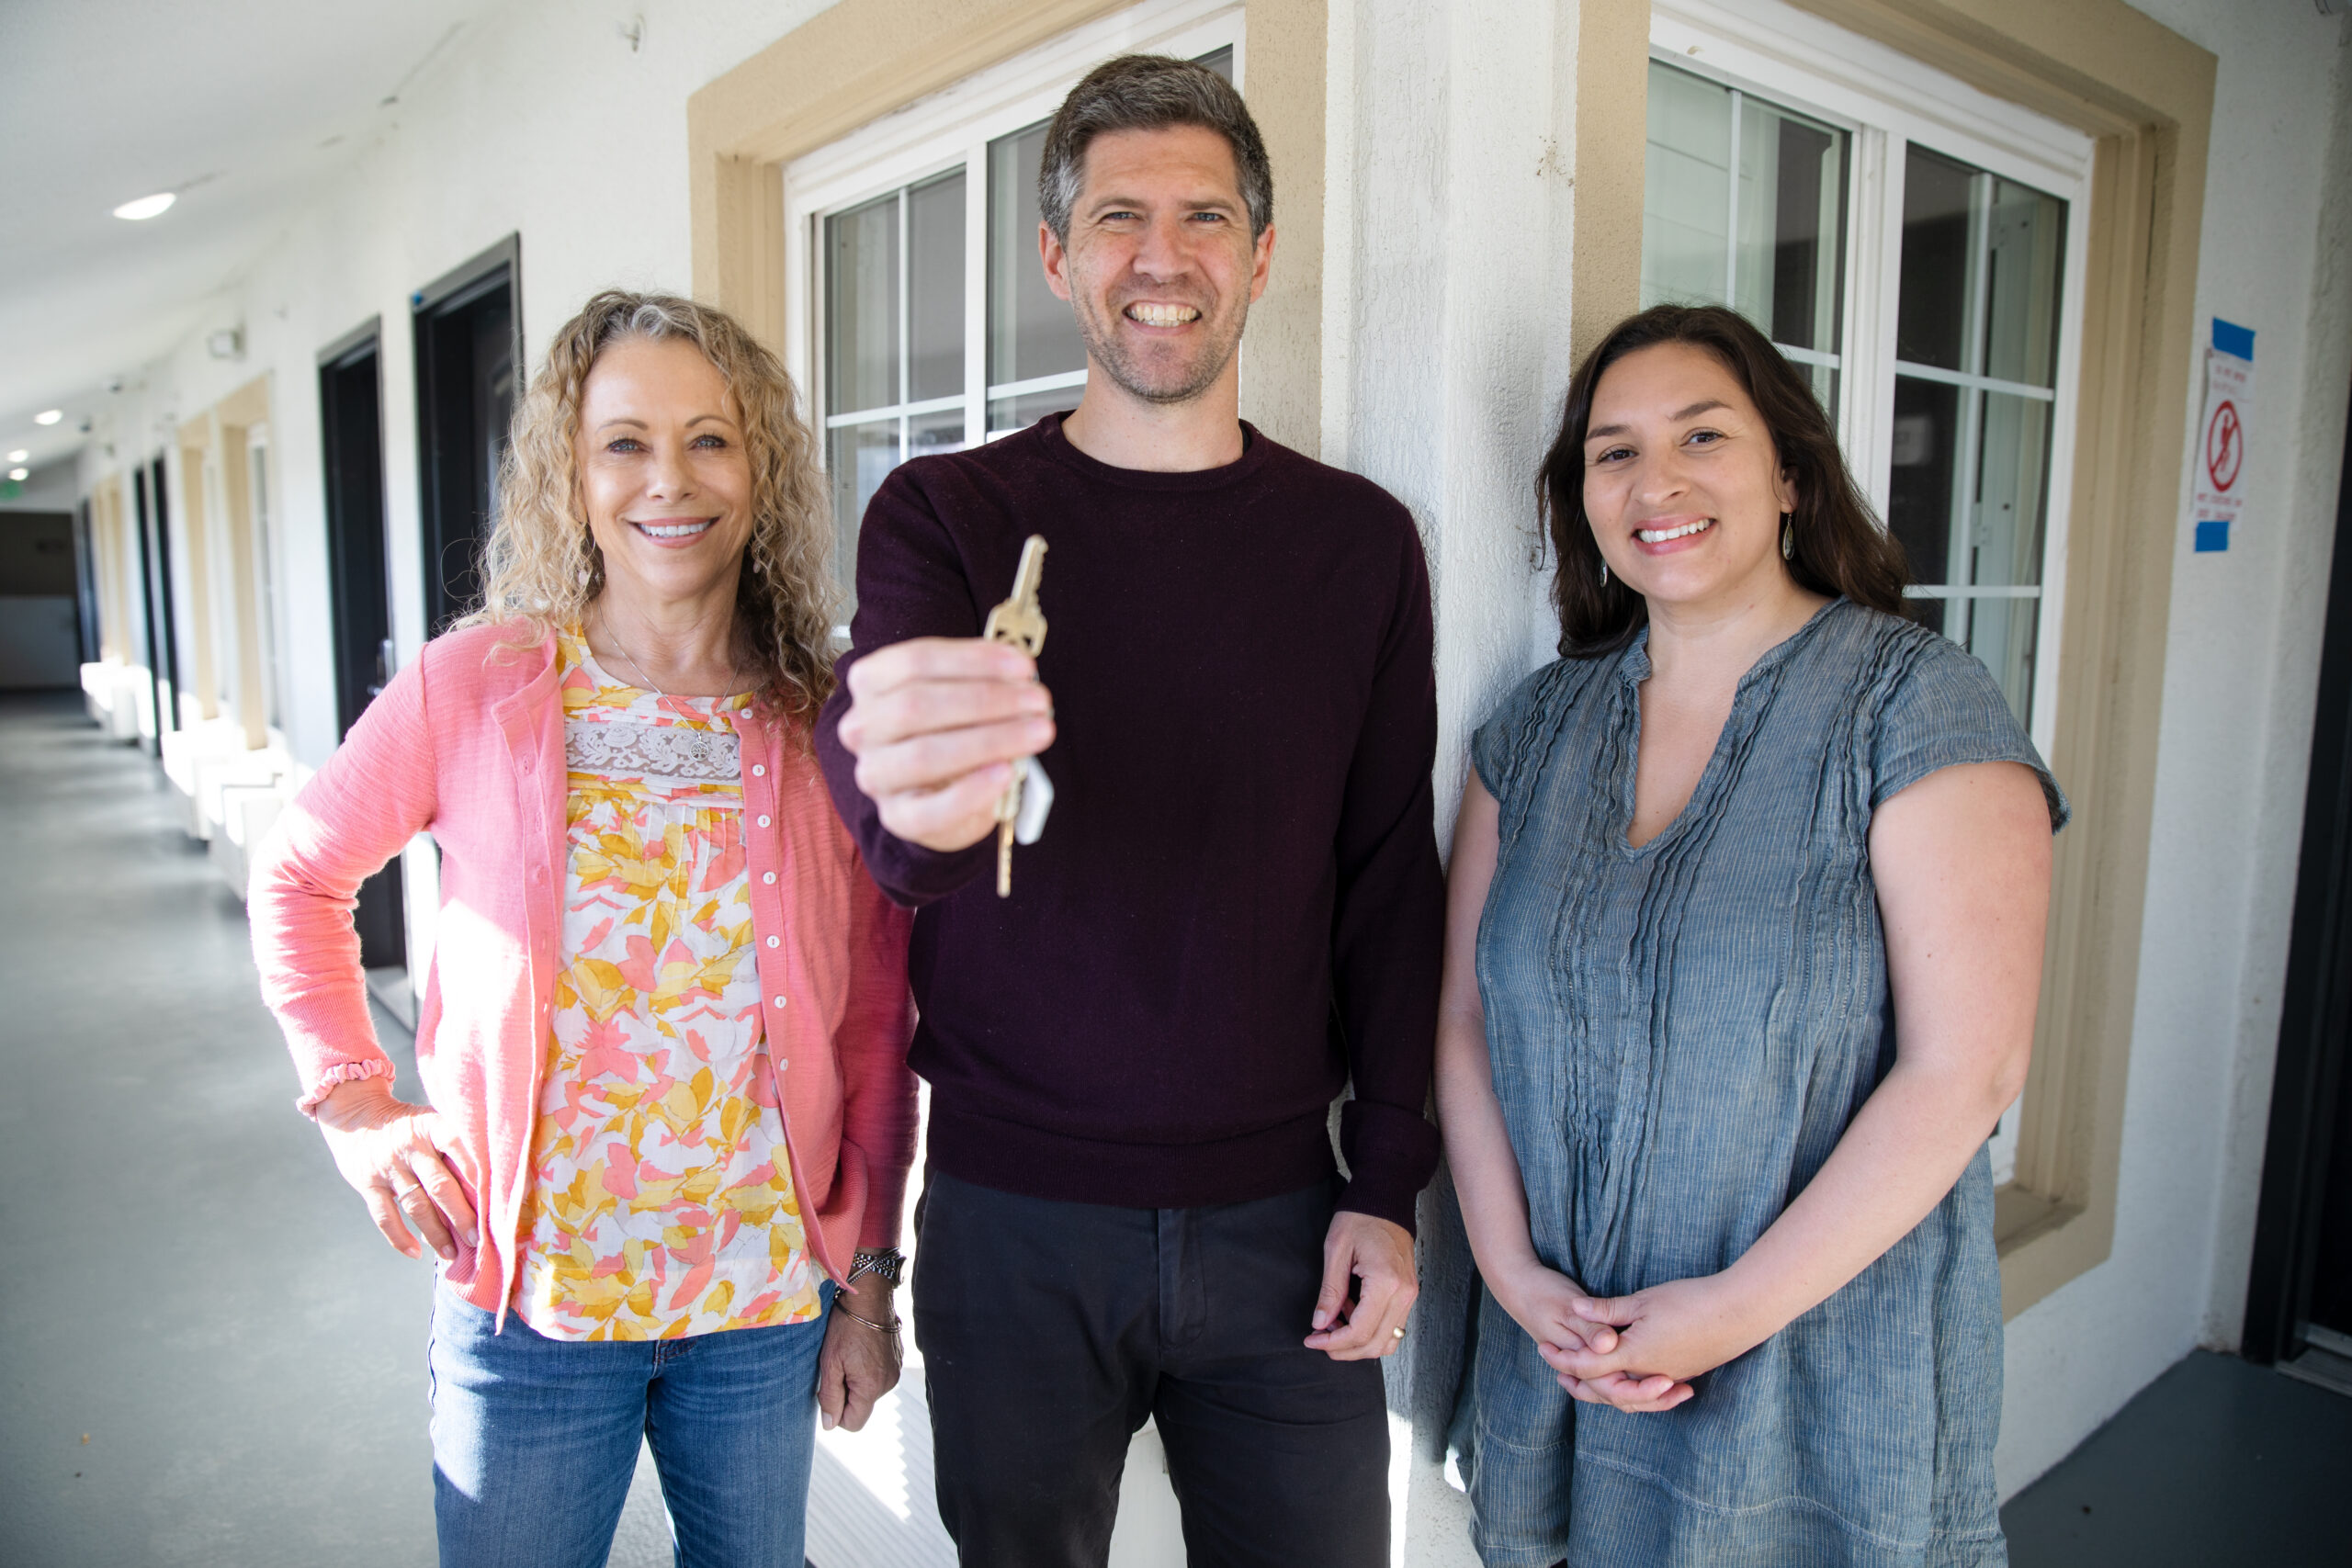 A man shows his new key with a woman standing on either side of him.